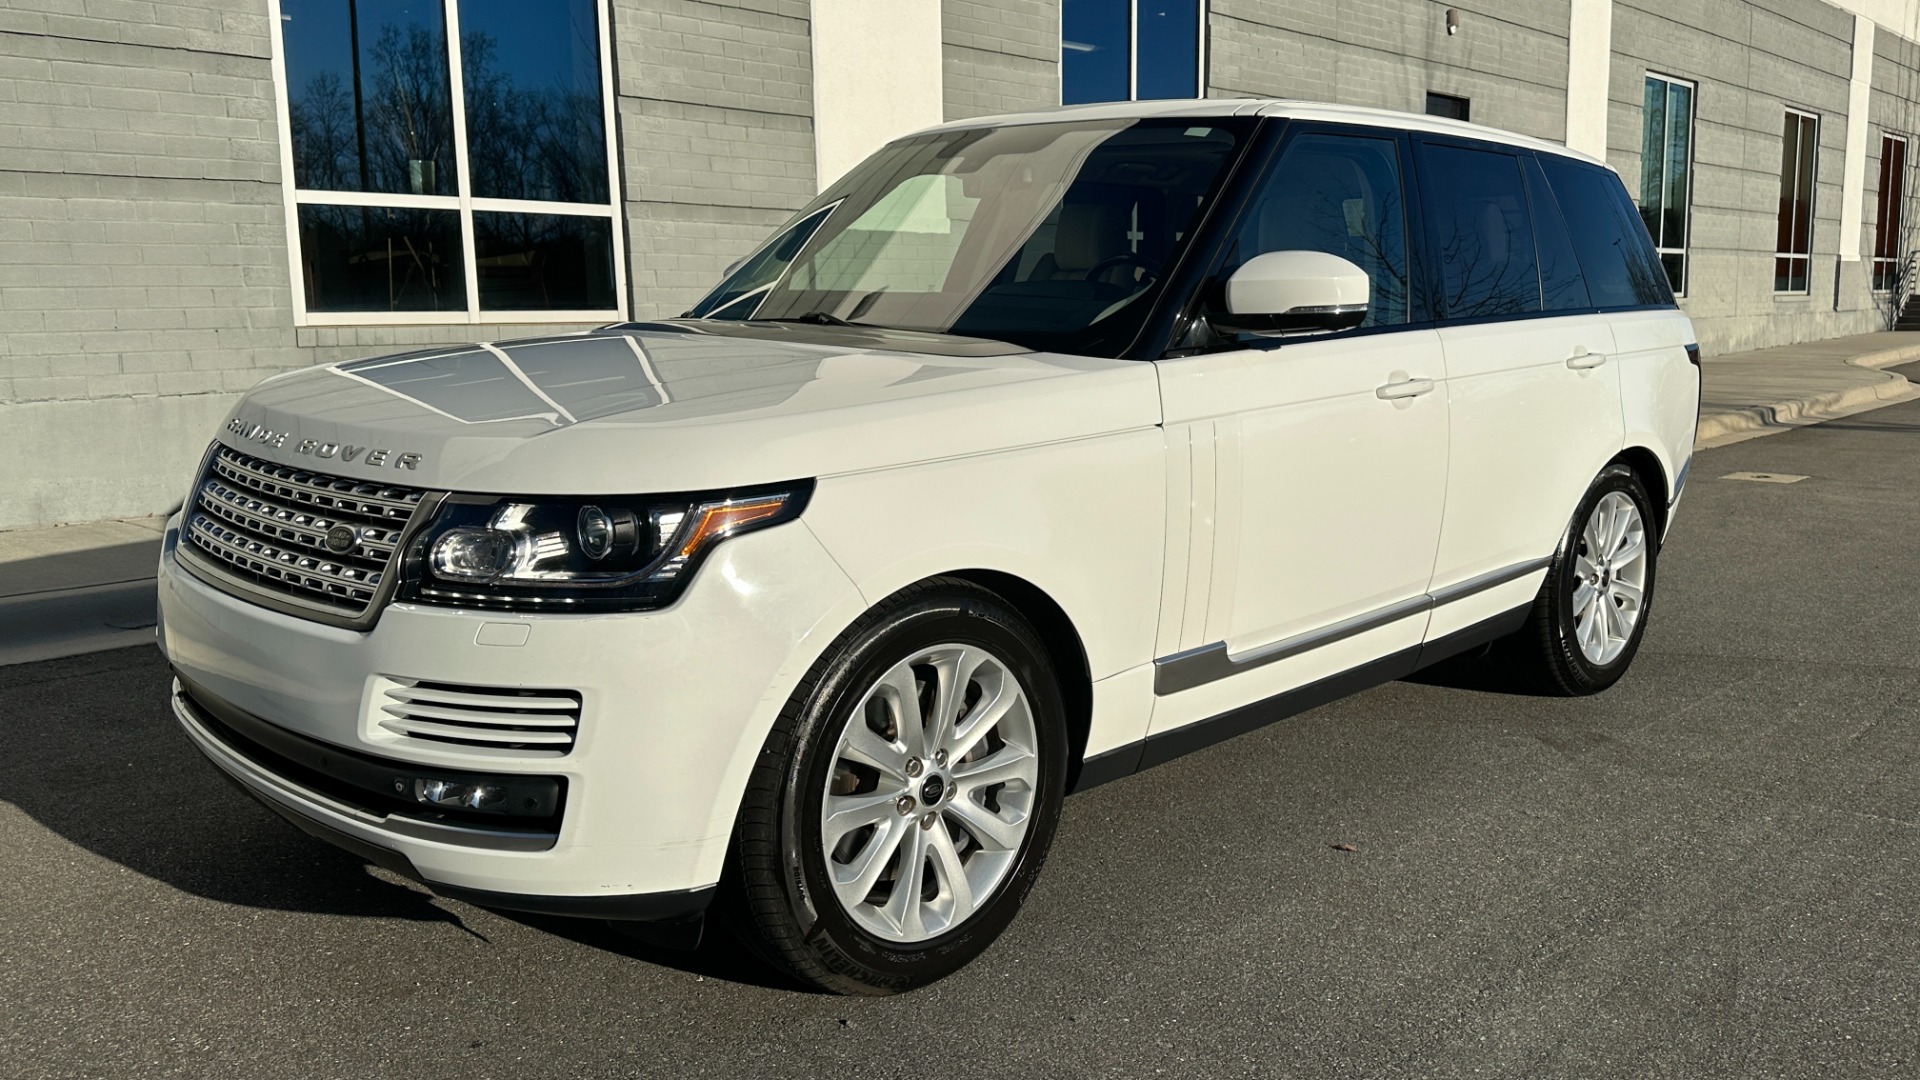 Used 2013 Land Rover Range Rover HSE / MERIDIAN SOUND / TOW PACK / VISION ASSIST / CLIMATE COMFORT for sale $30,995 at Formula Imports in Charlotte NC 28227 2